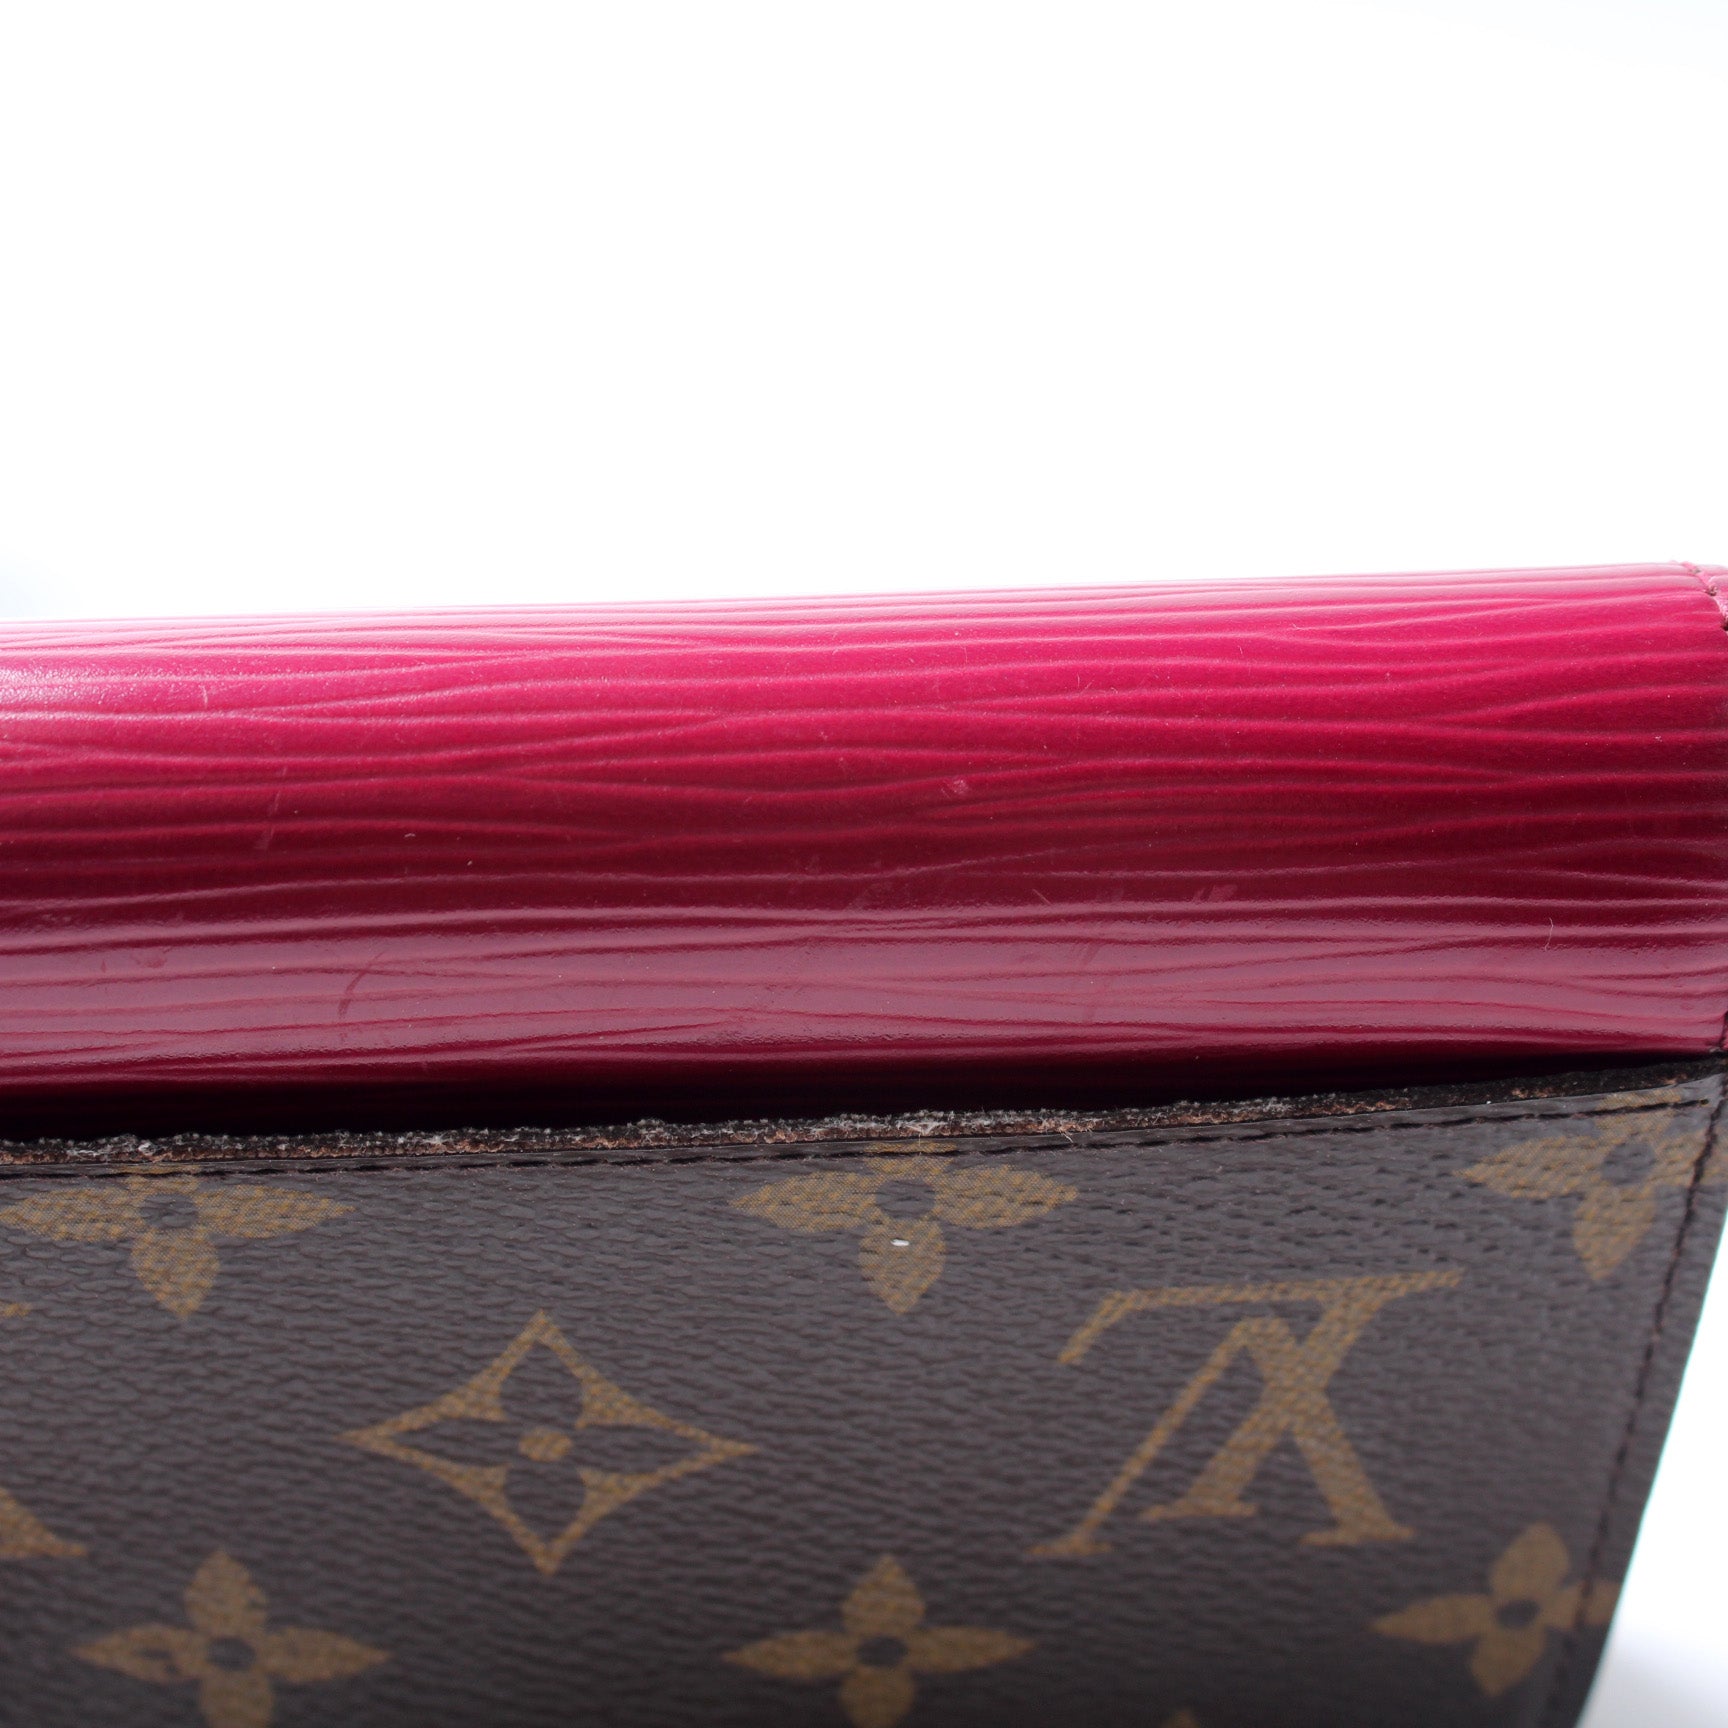 Louis Vuitton Canvas and Epi Leather Marie-Lou Wallet at 1stDibs